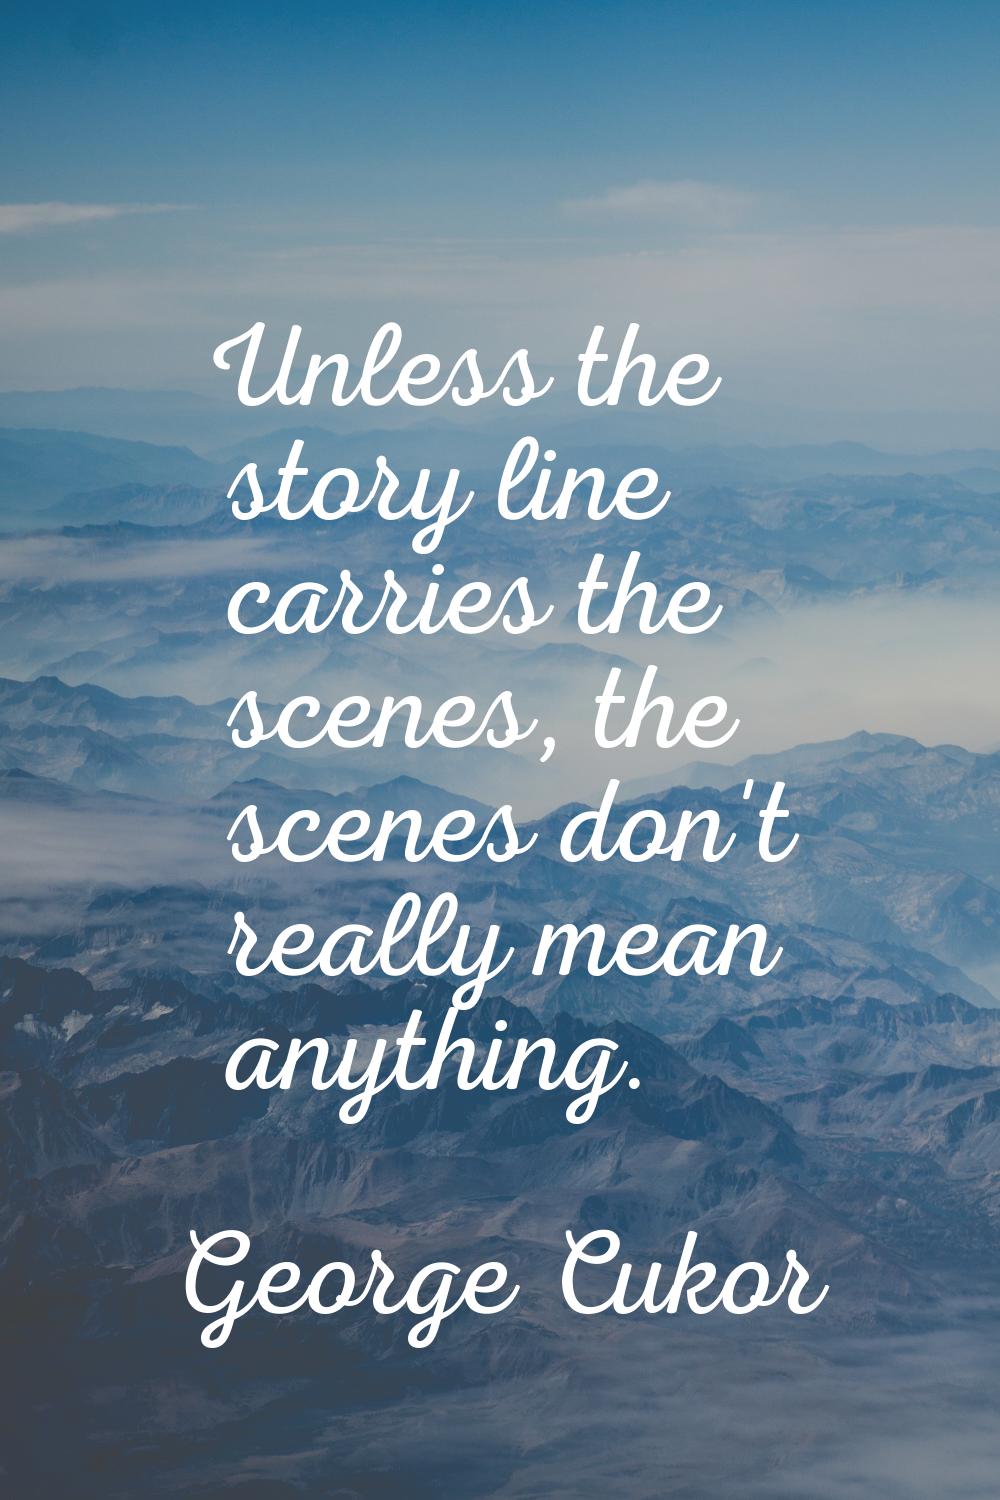 Unless the story line carries the scenes, the scenes don't really mean anything.